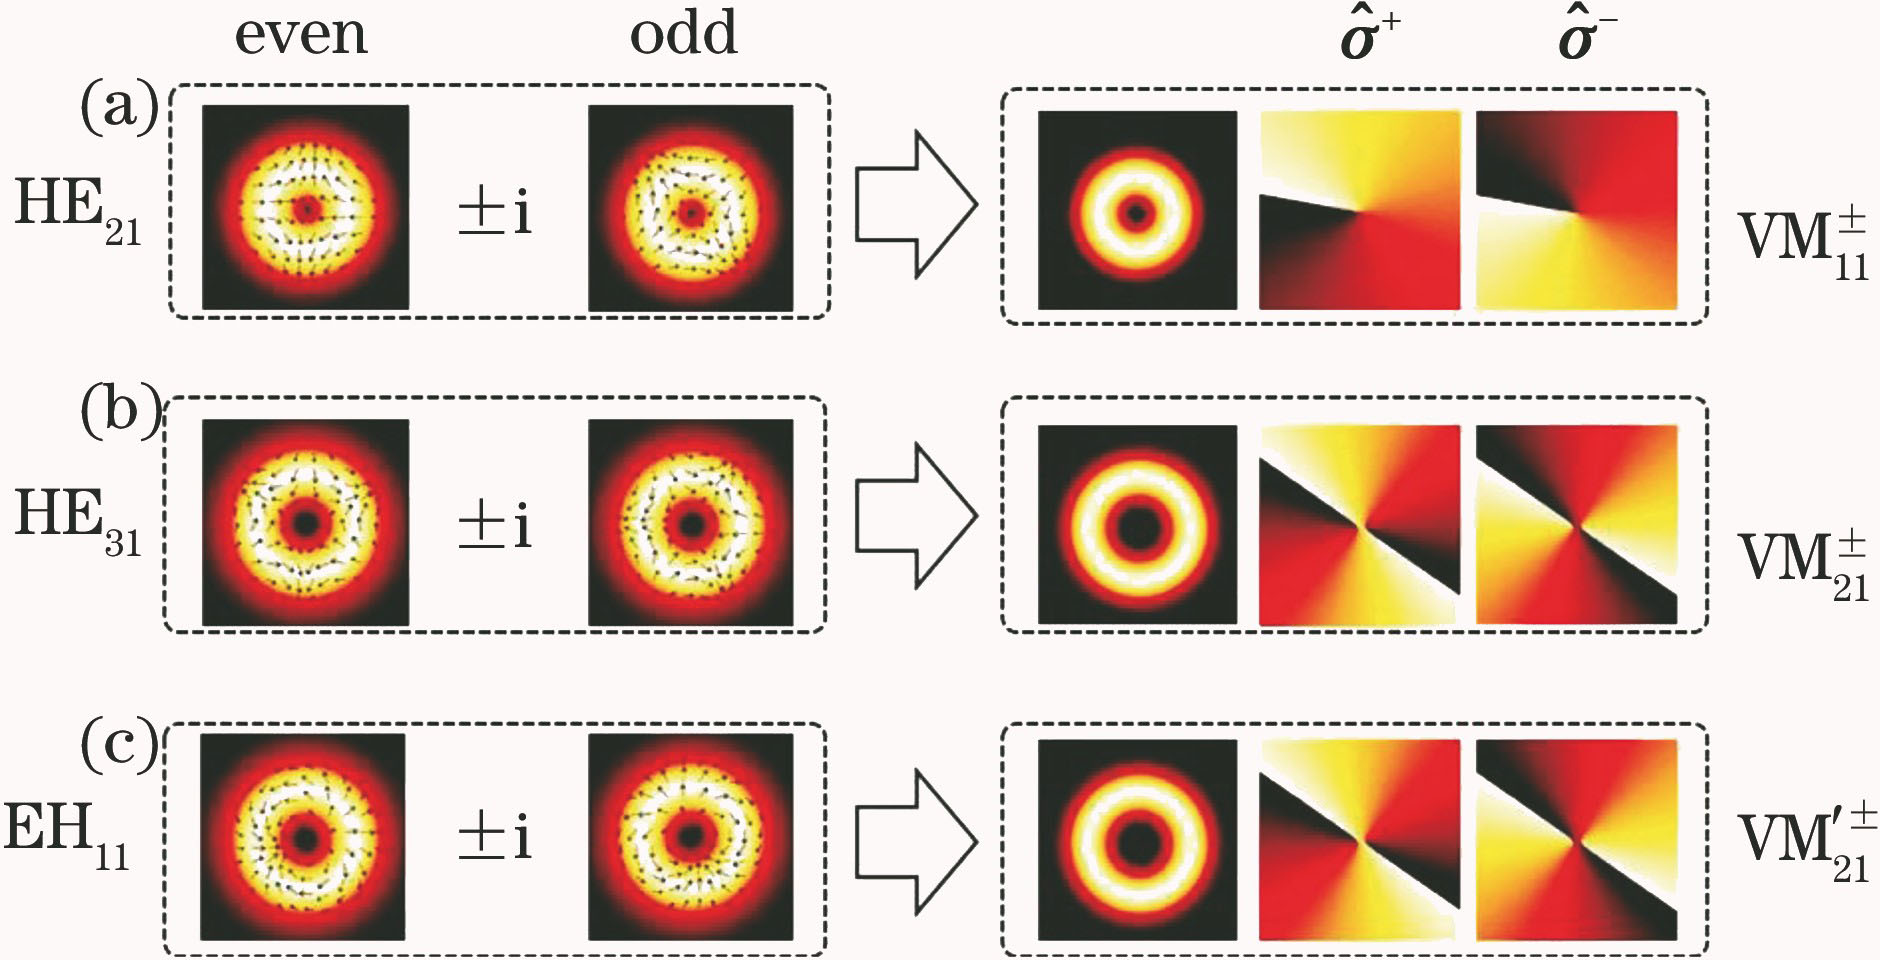 Numerical simulation results of vortex light field generation by superposition of three strict degenerate high-order vector modes[24]. (a) HE21even/odd; (b) HE31even/odd; (c) EH11even/odd